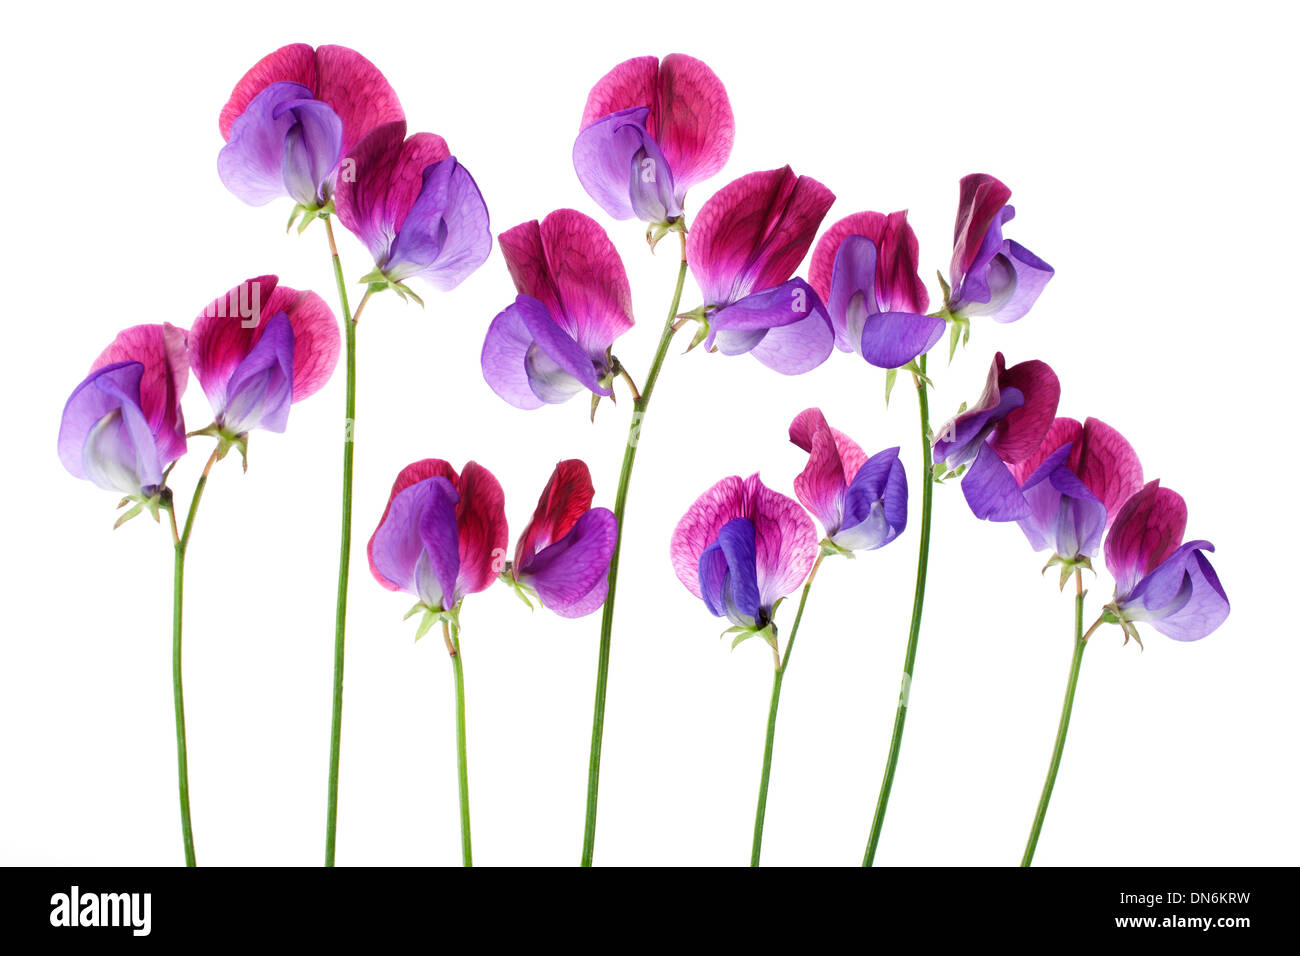 Sweet Pea 'Cupani' flowers arranged in a row isolated on white background with shallow depth of field Stock Photo